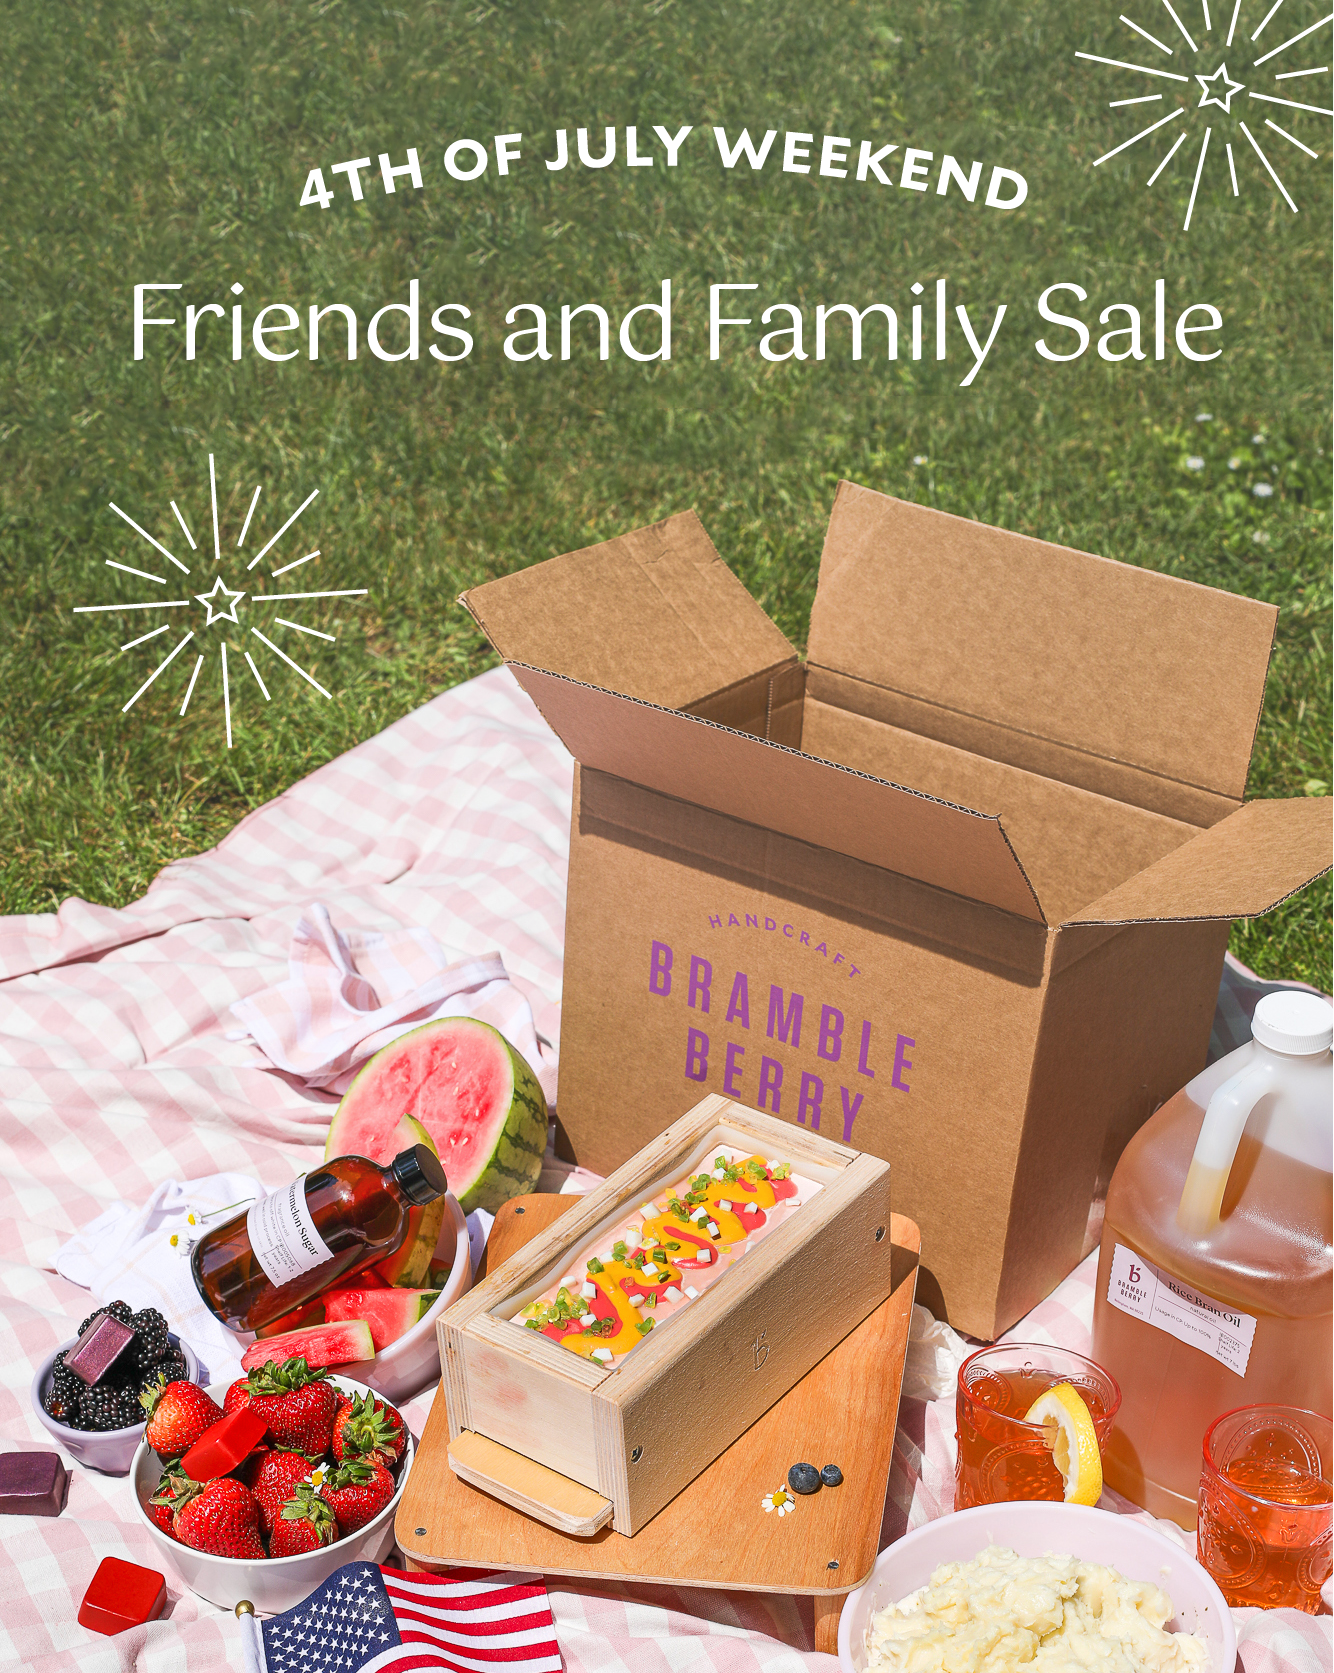 4th of July Friends and Family Sale - Save 10% off your purchase of $99+